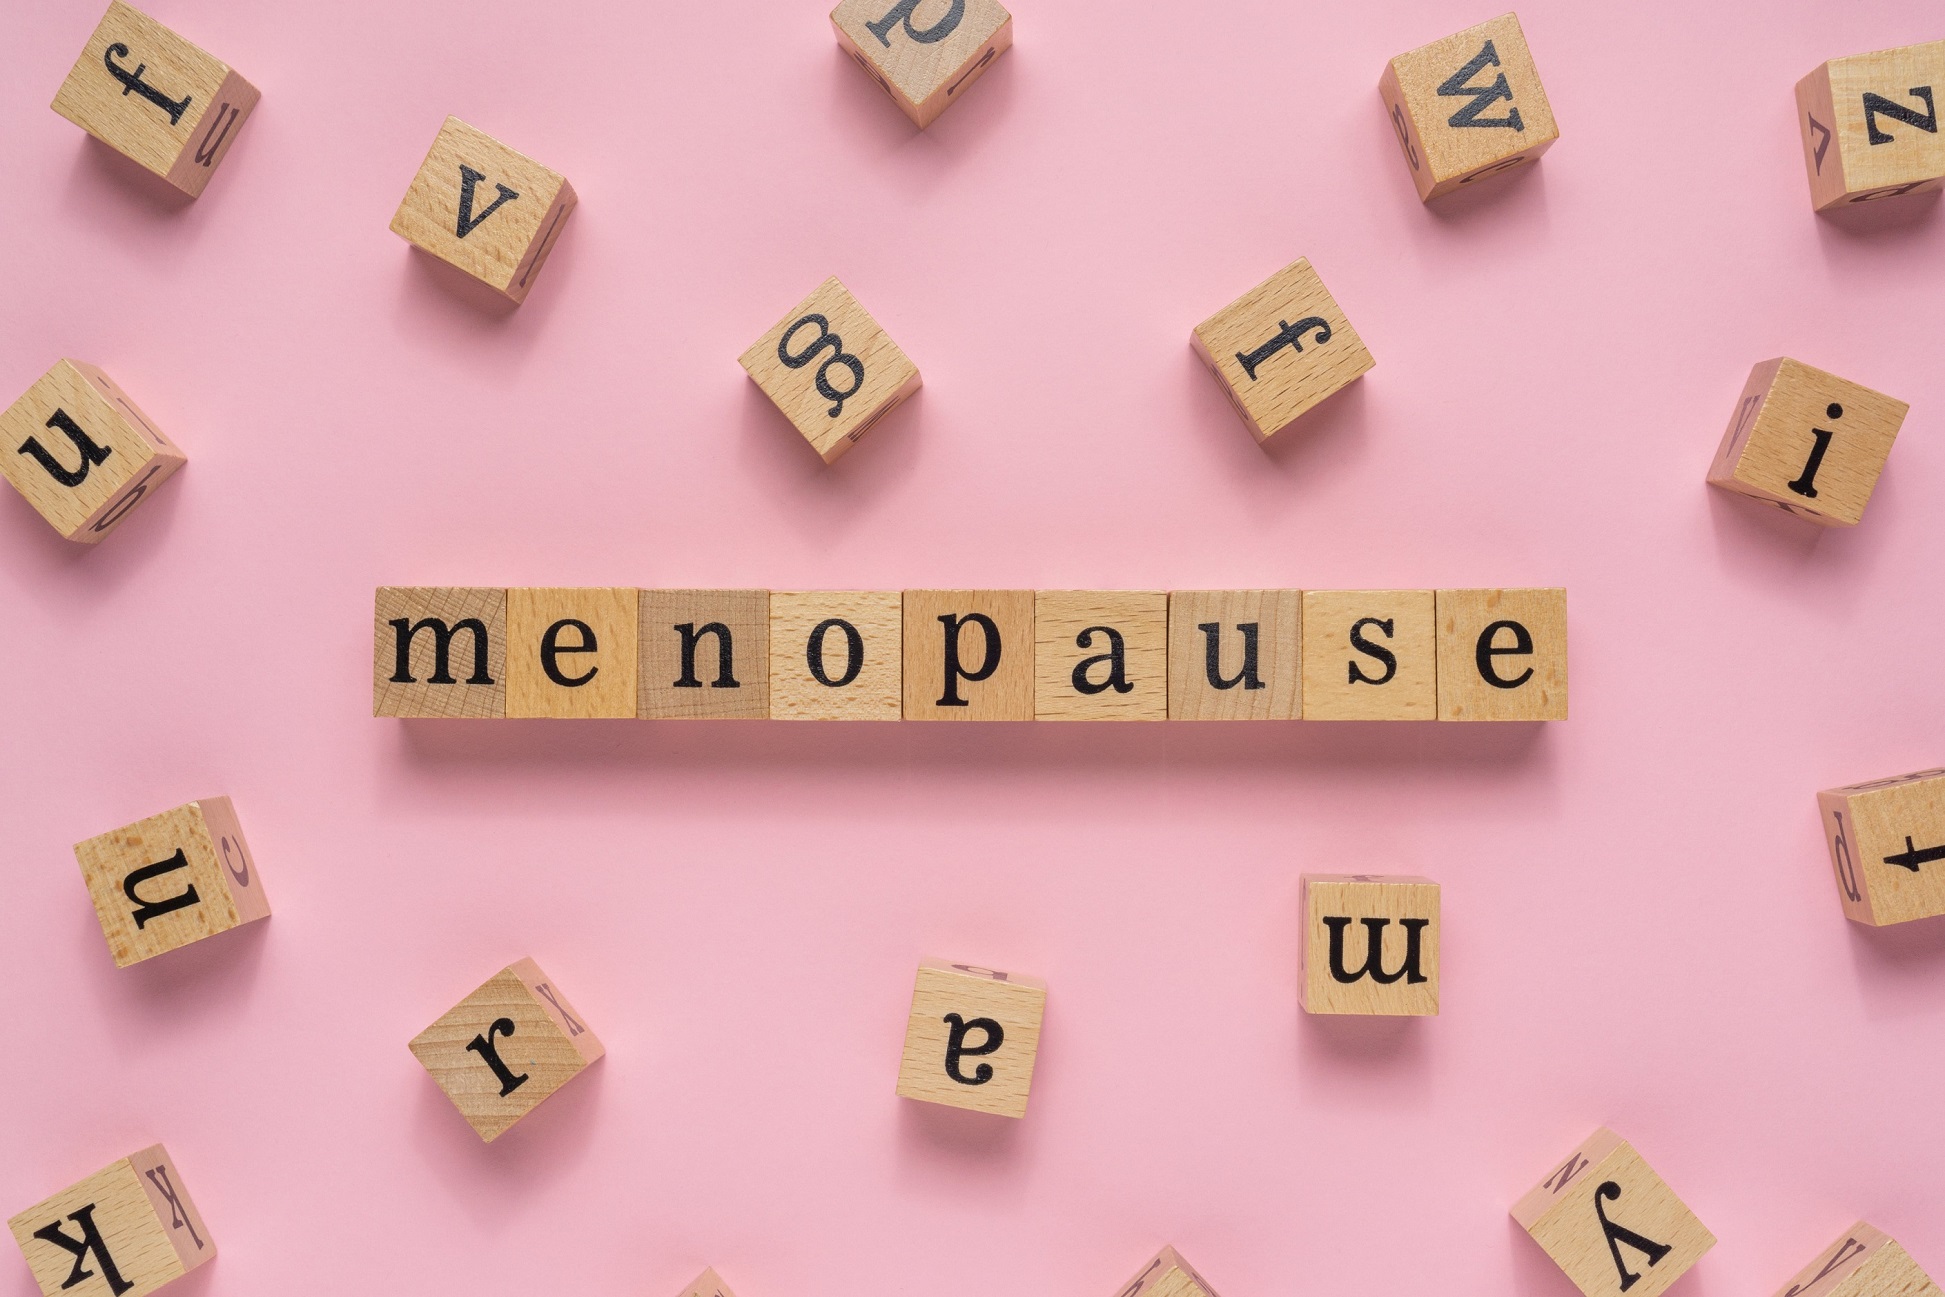 Can The Symptoms of Menopause Sometimes Be Confused for Dementia And Vice Versa